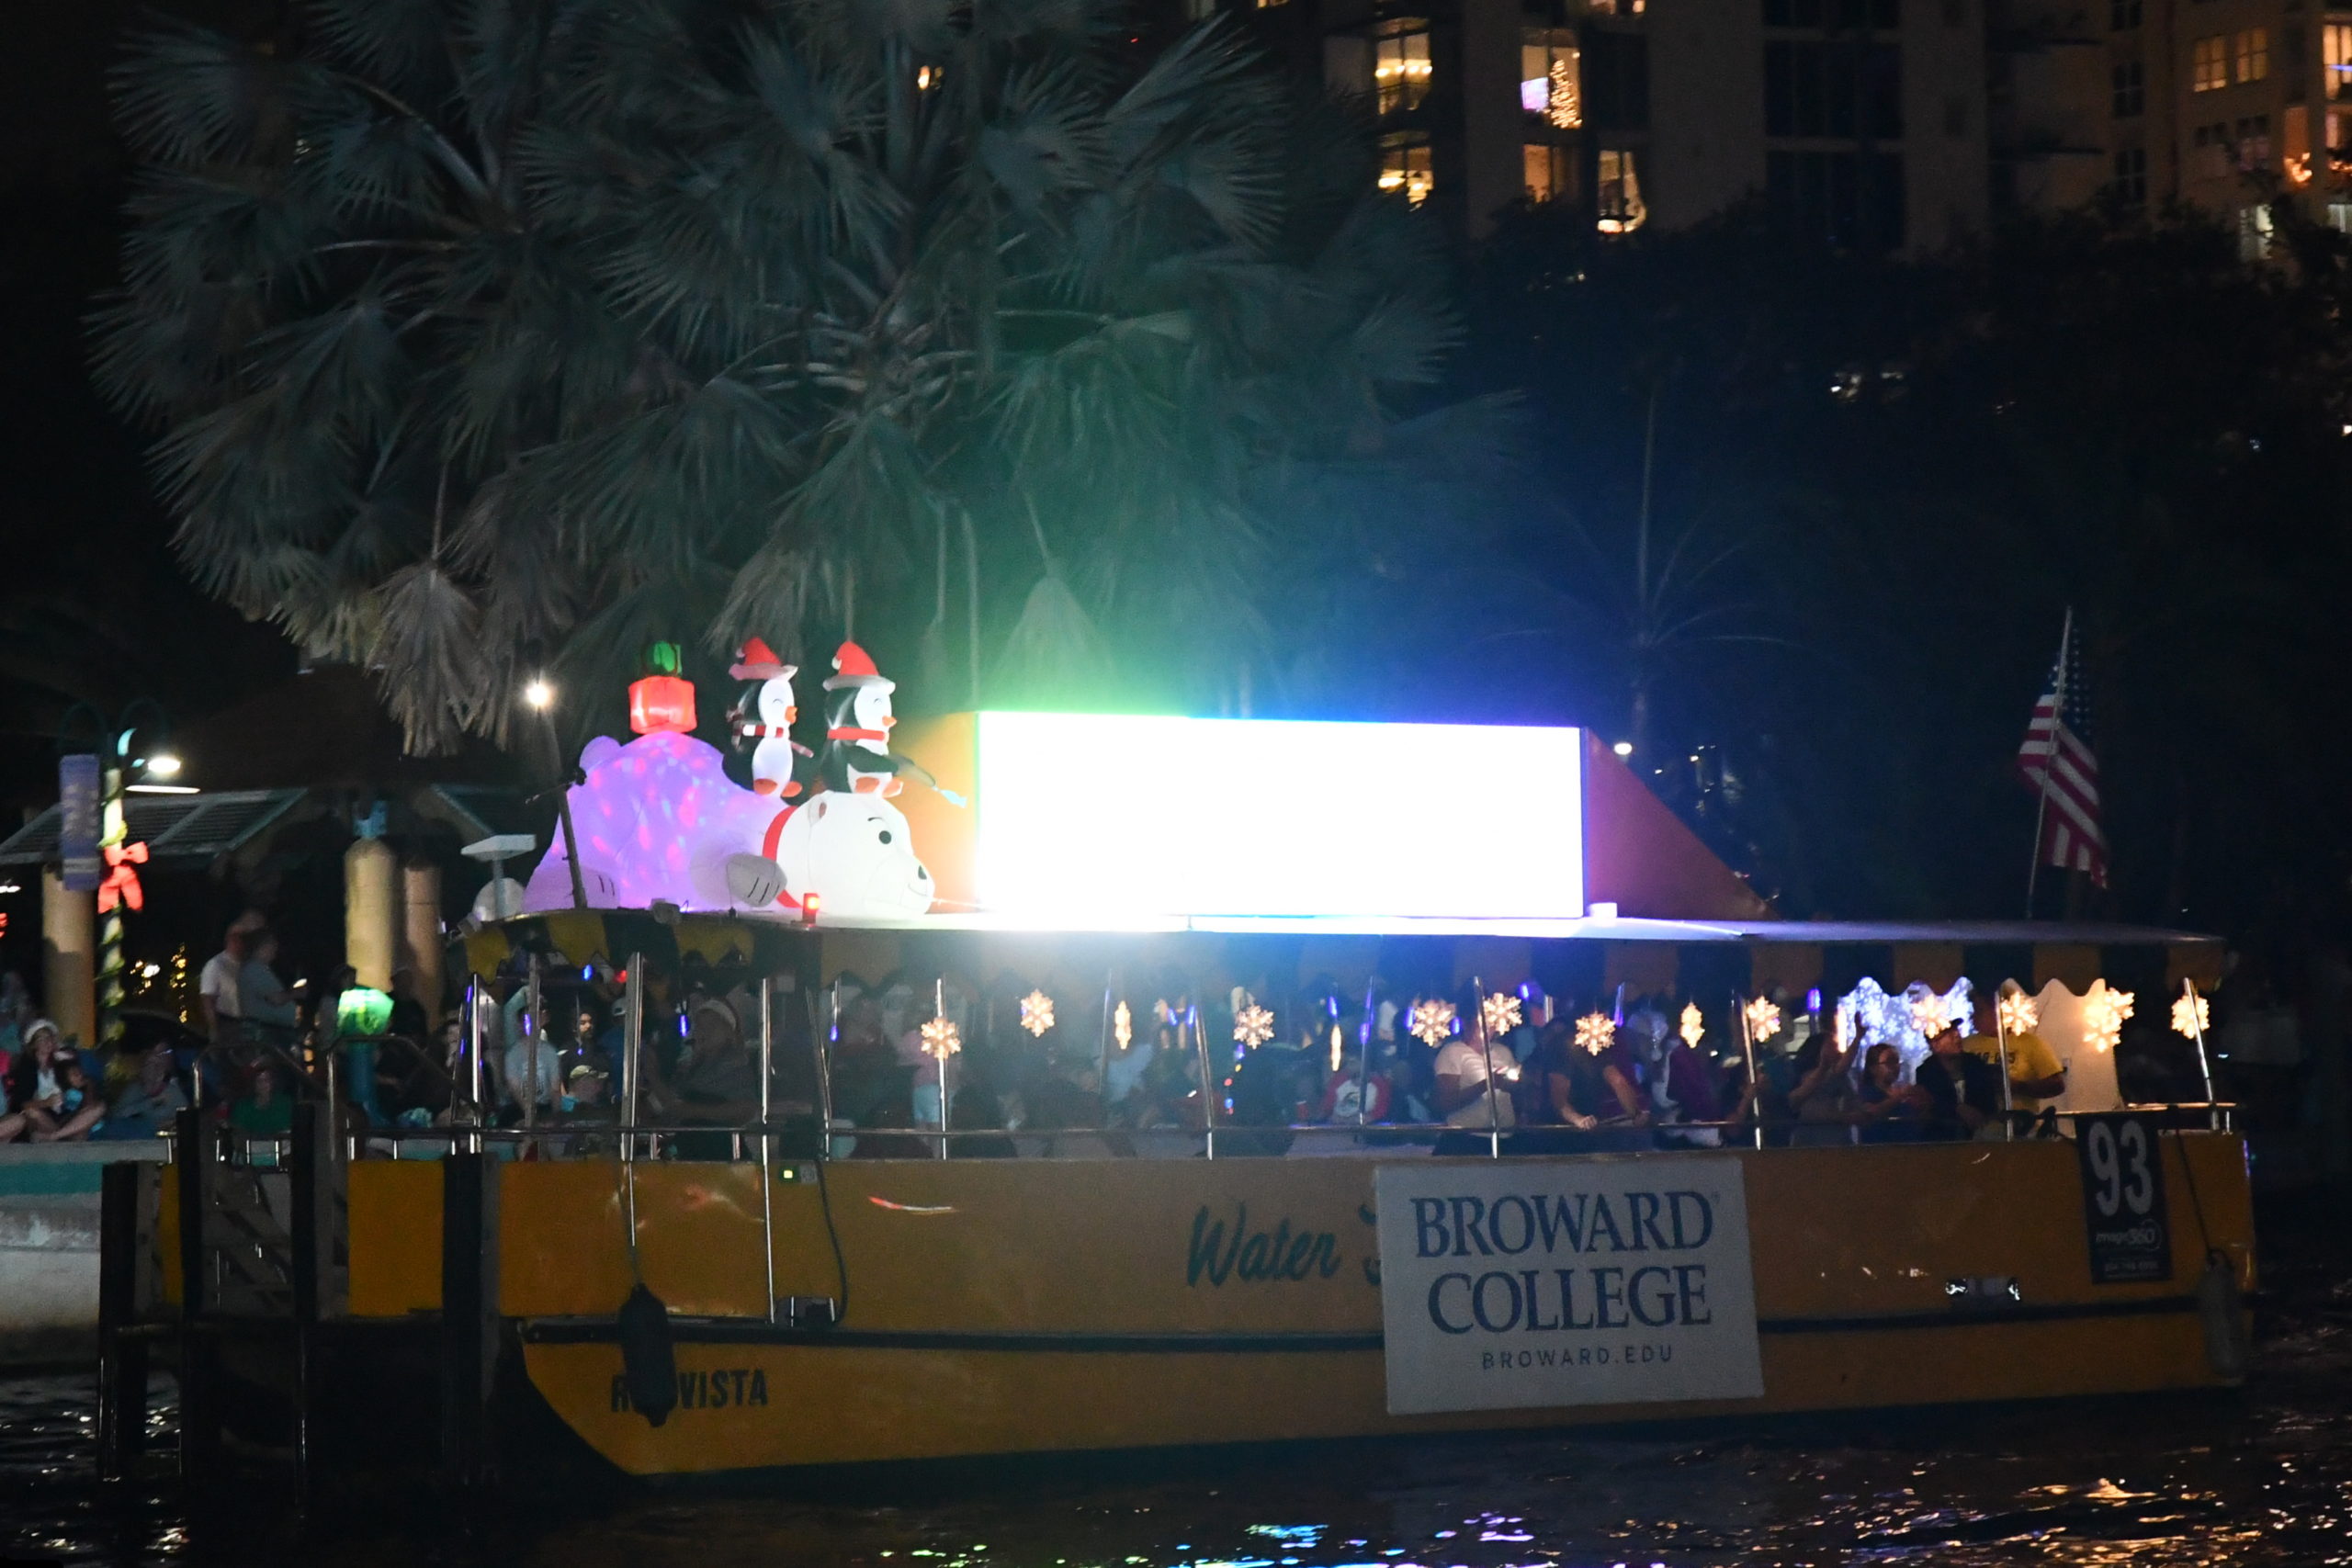 Broward College aboard Water Taxi Rio Vista, boat number 93 in the 2022 Winterfest Boat Parade